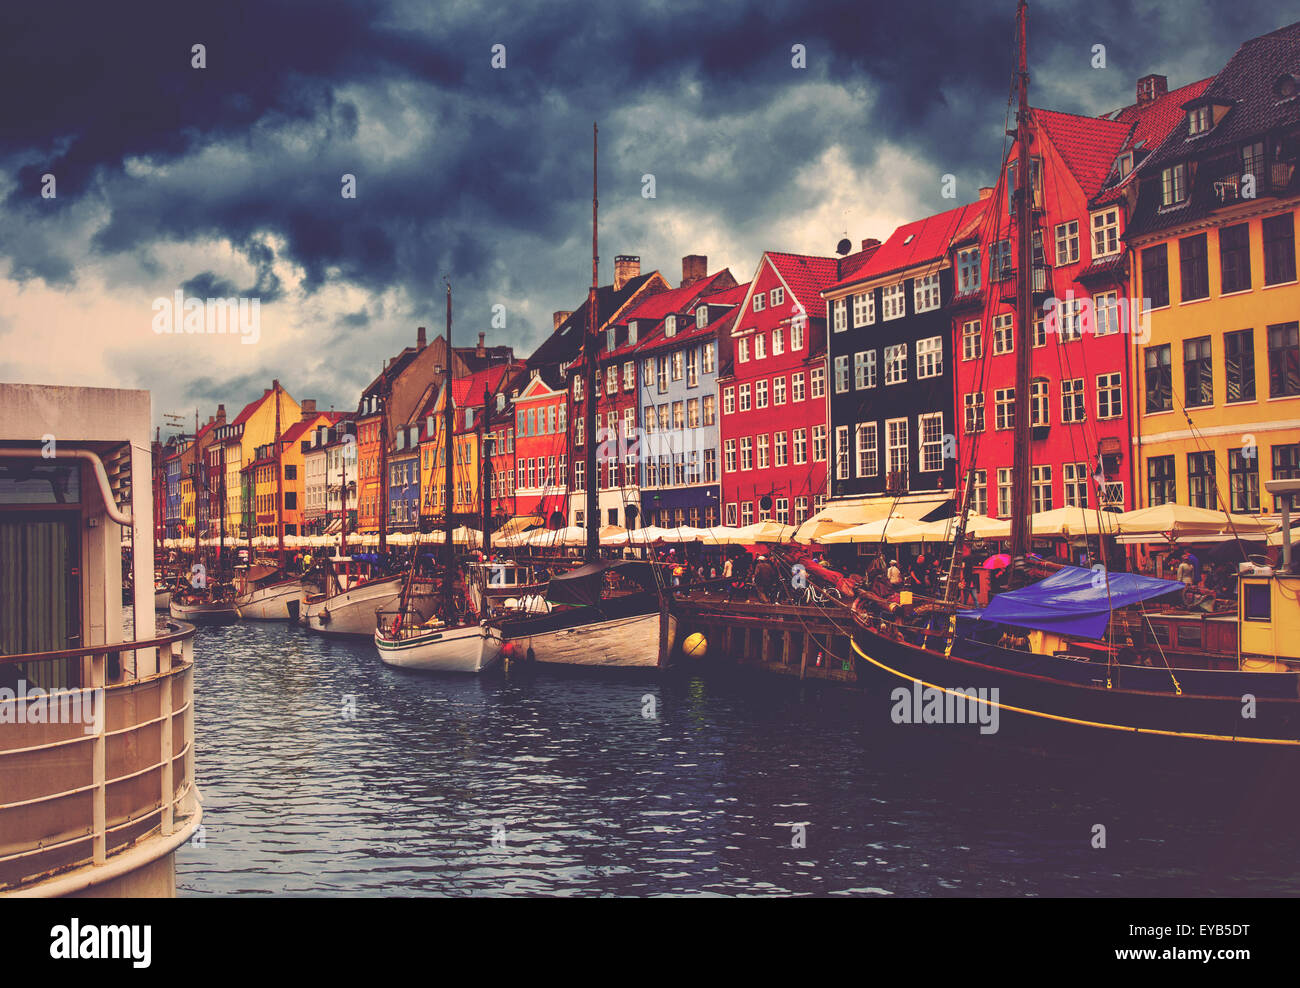 Copenhagen Nyhavn, Retro Toned Image of Canal and District with its Colorful Facades on Cloudy Spring Day Stock Photo